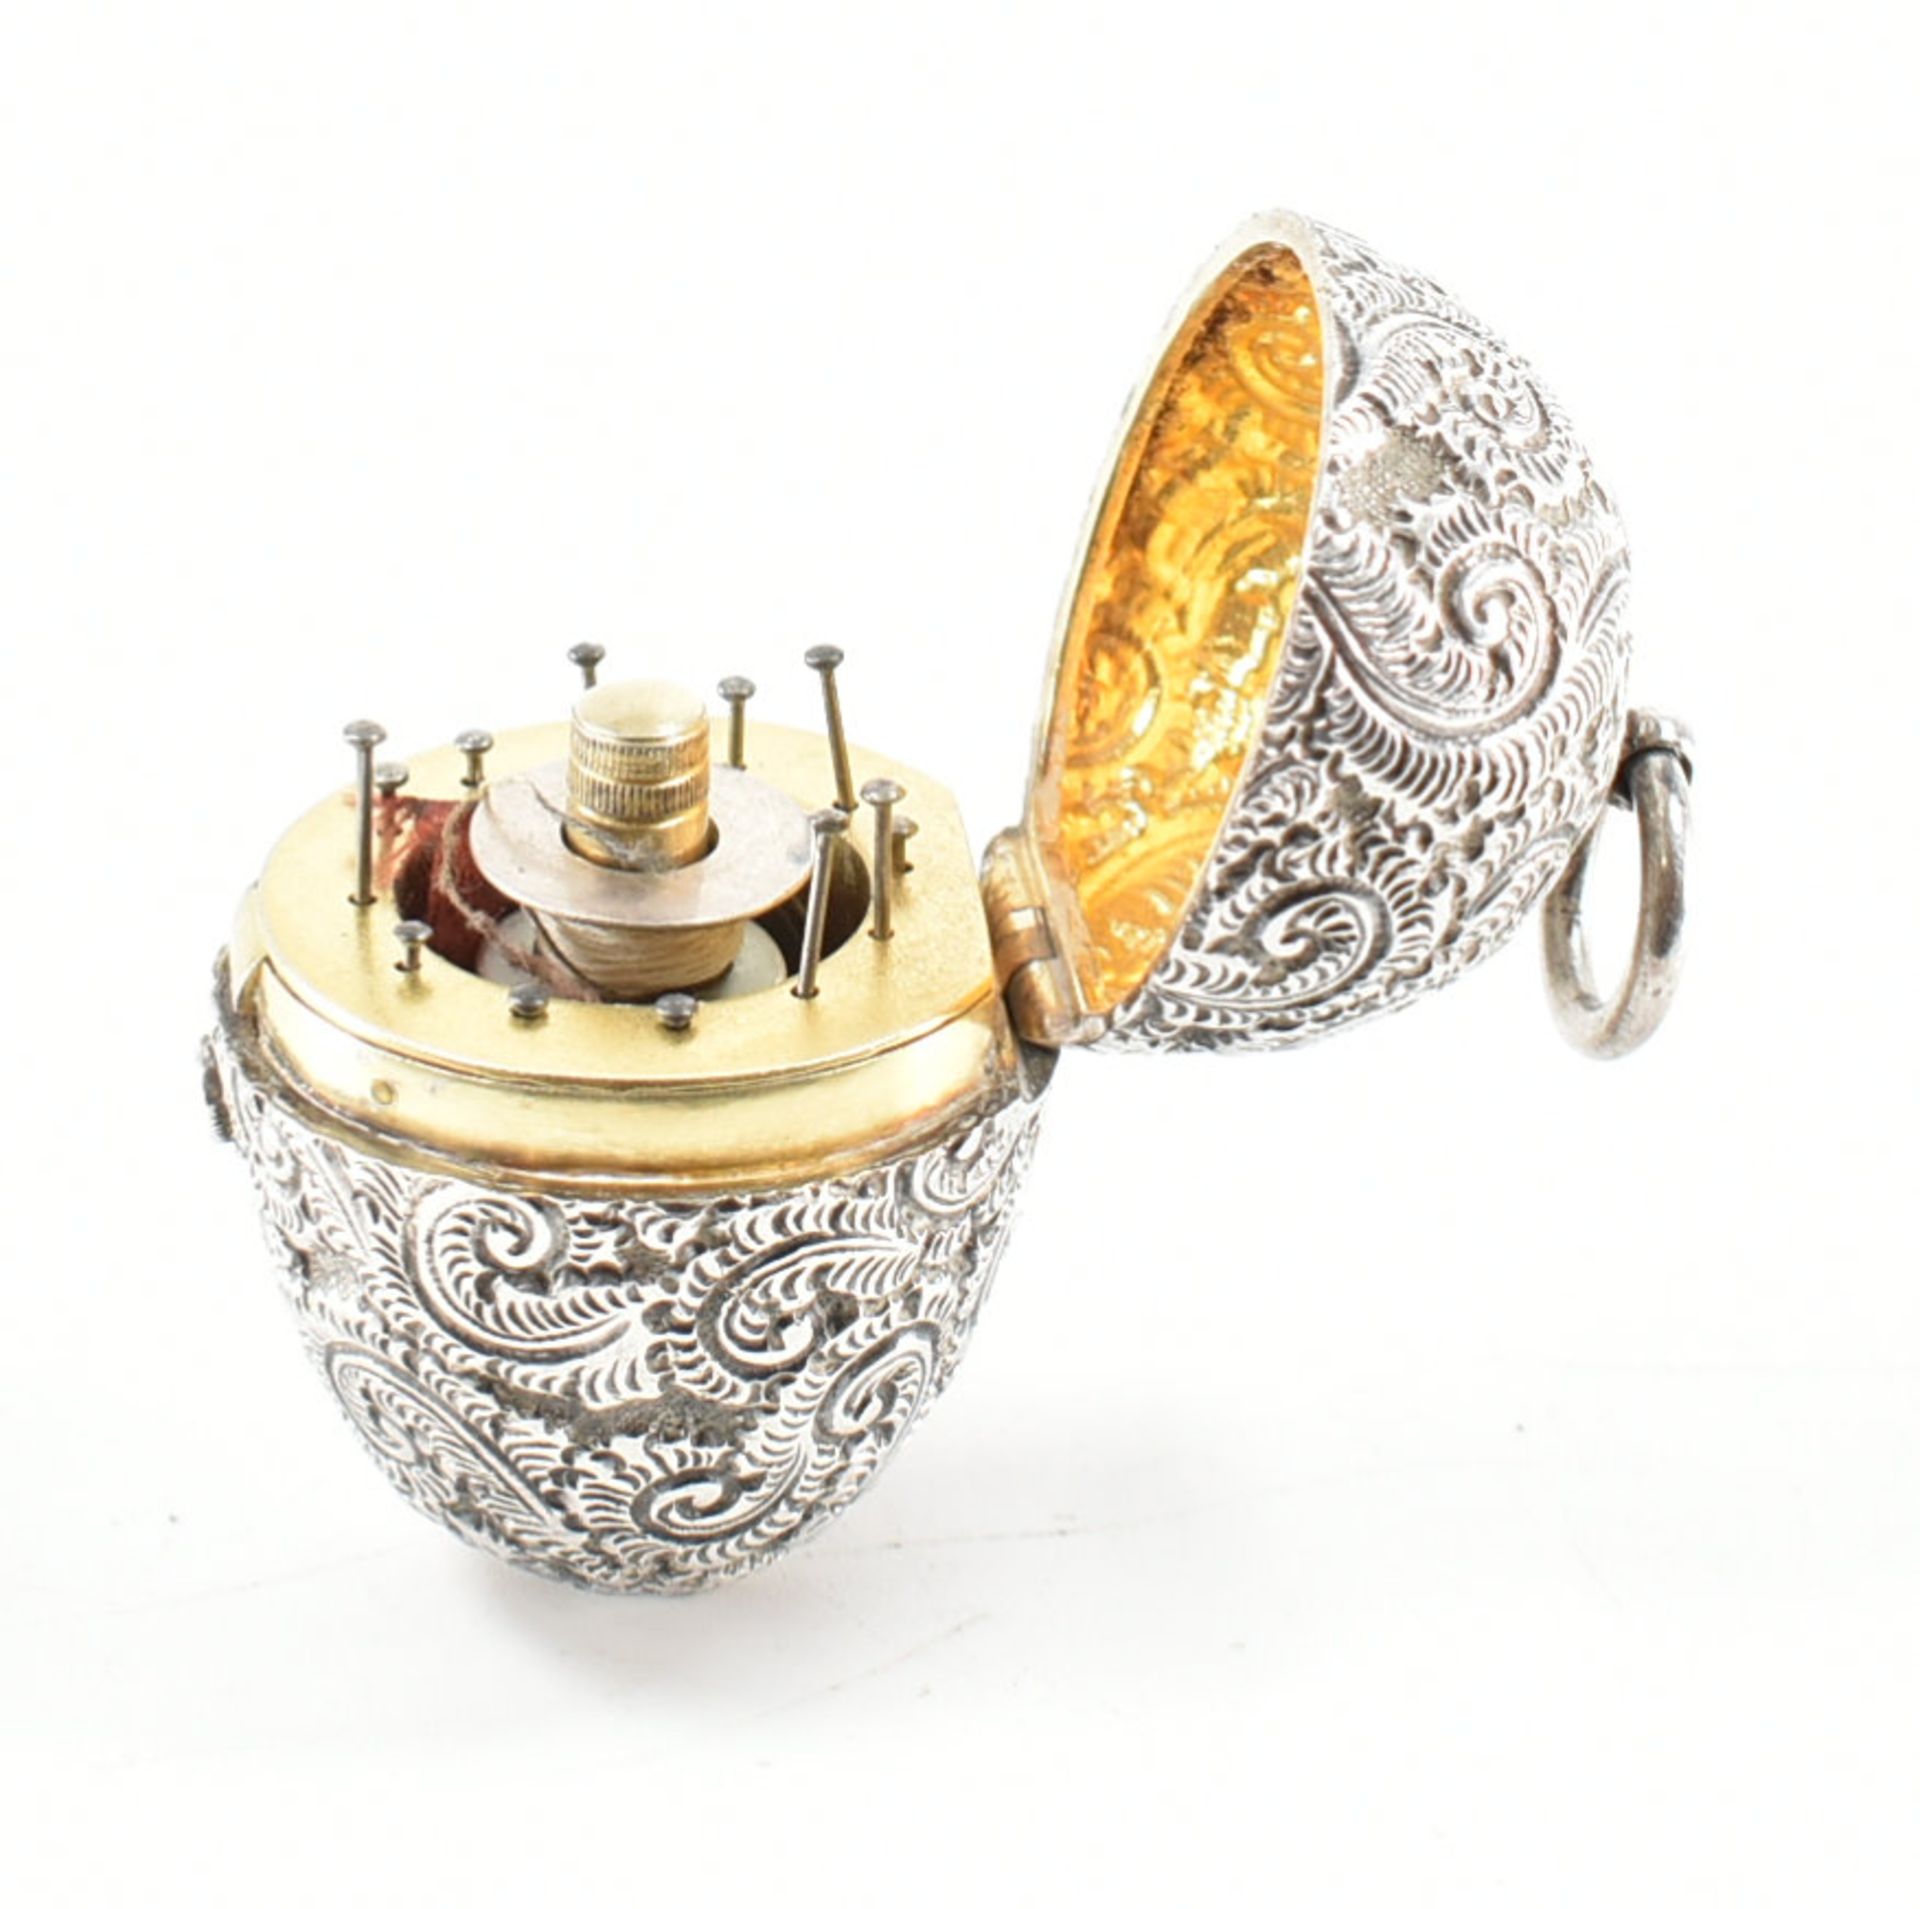 ANTIQUE SILVER & GILT EGG SEWING CASE - Image 2 of 5